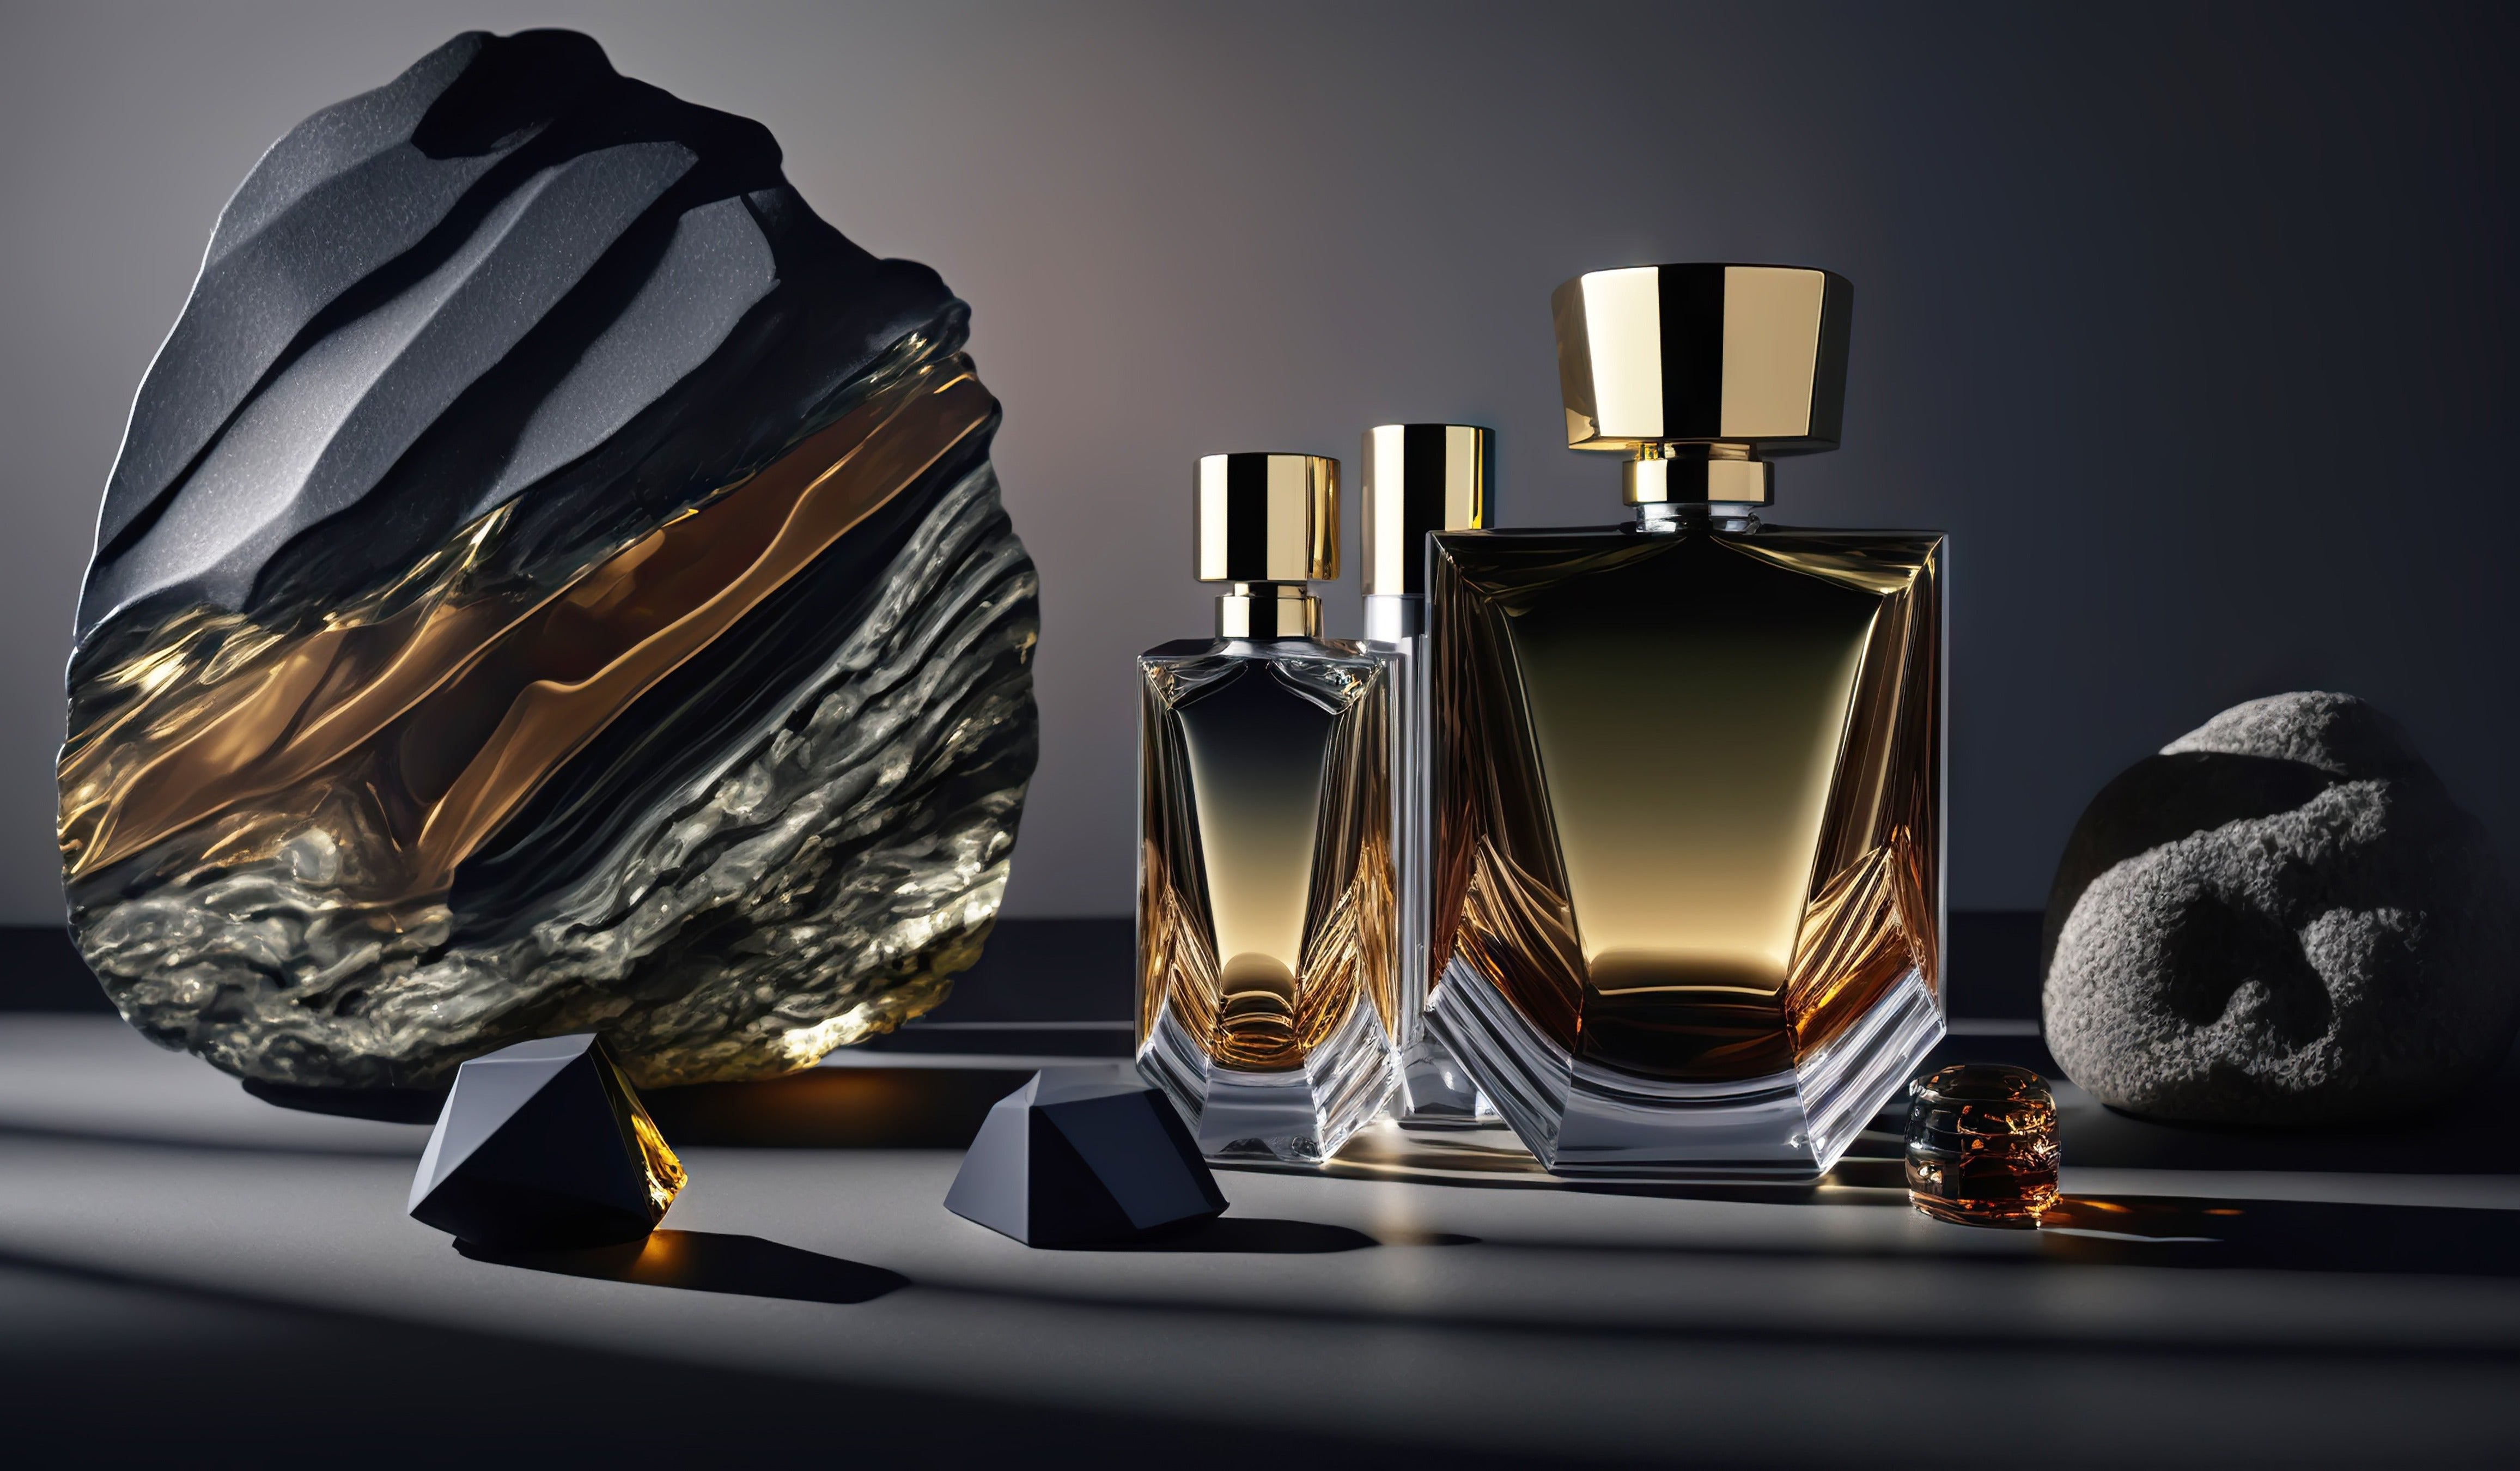 The Luxury Fragrance Collection